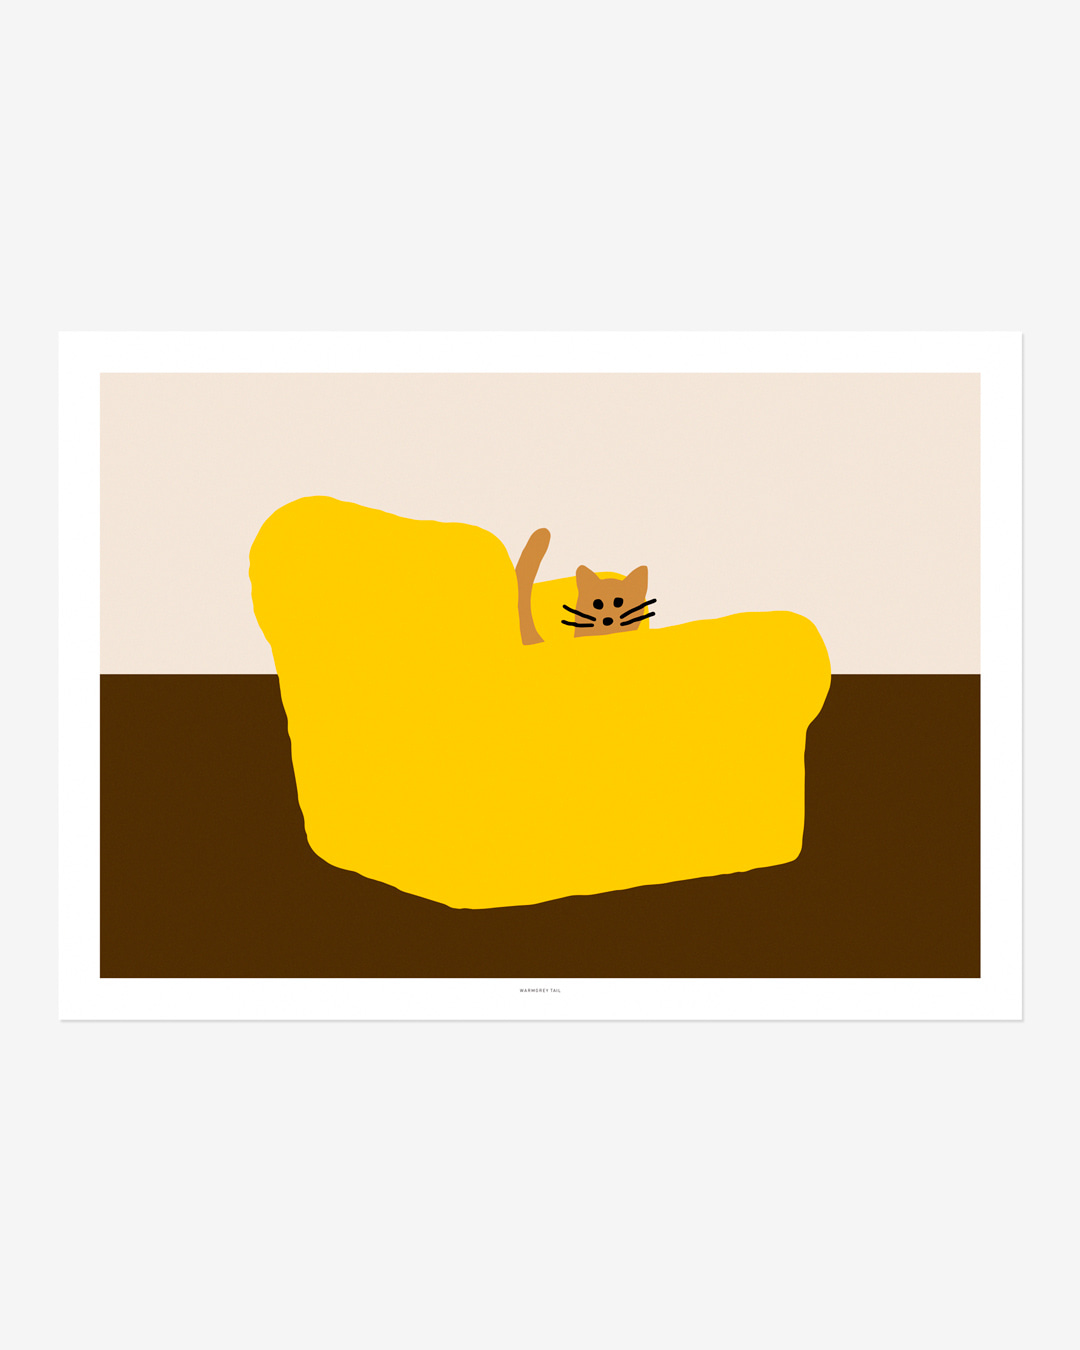 ARMCHAIR - YELLOW POSTER